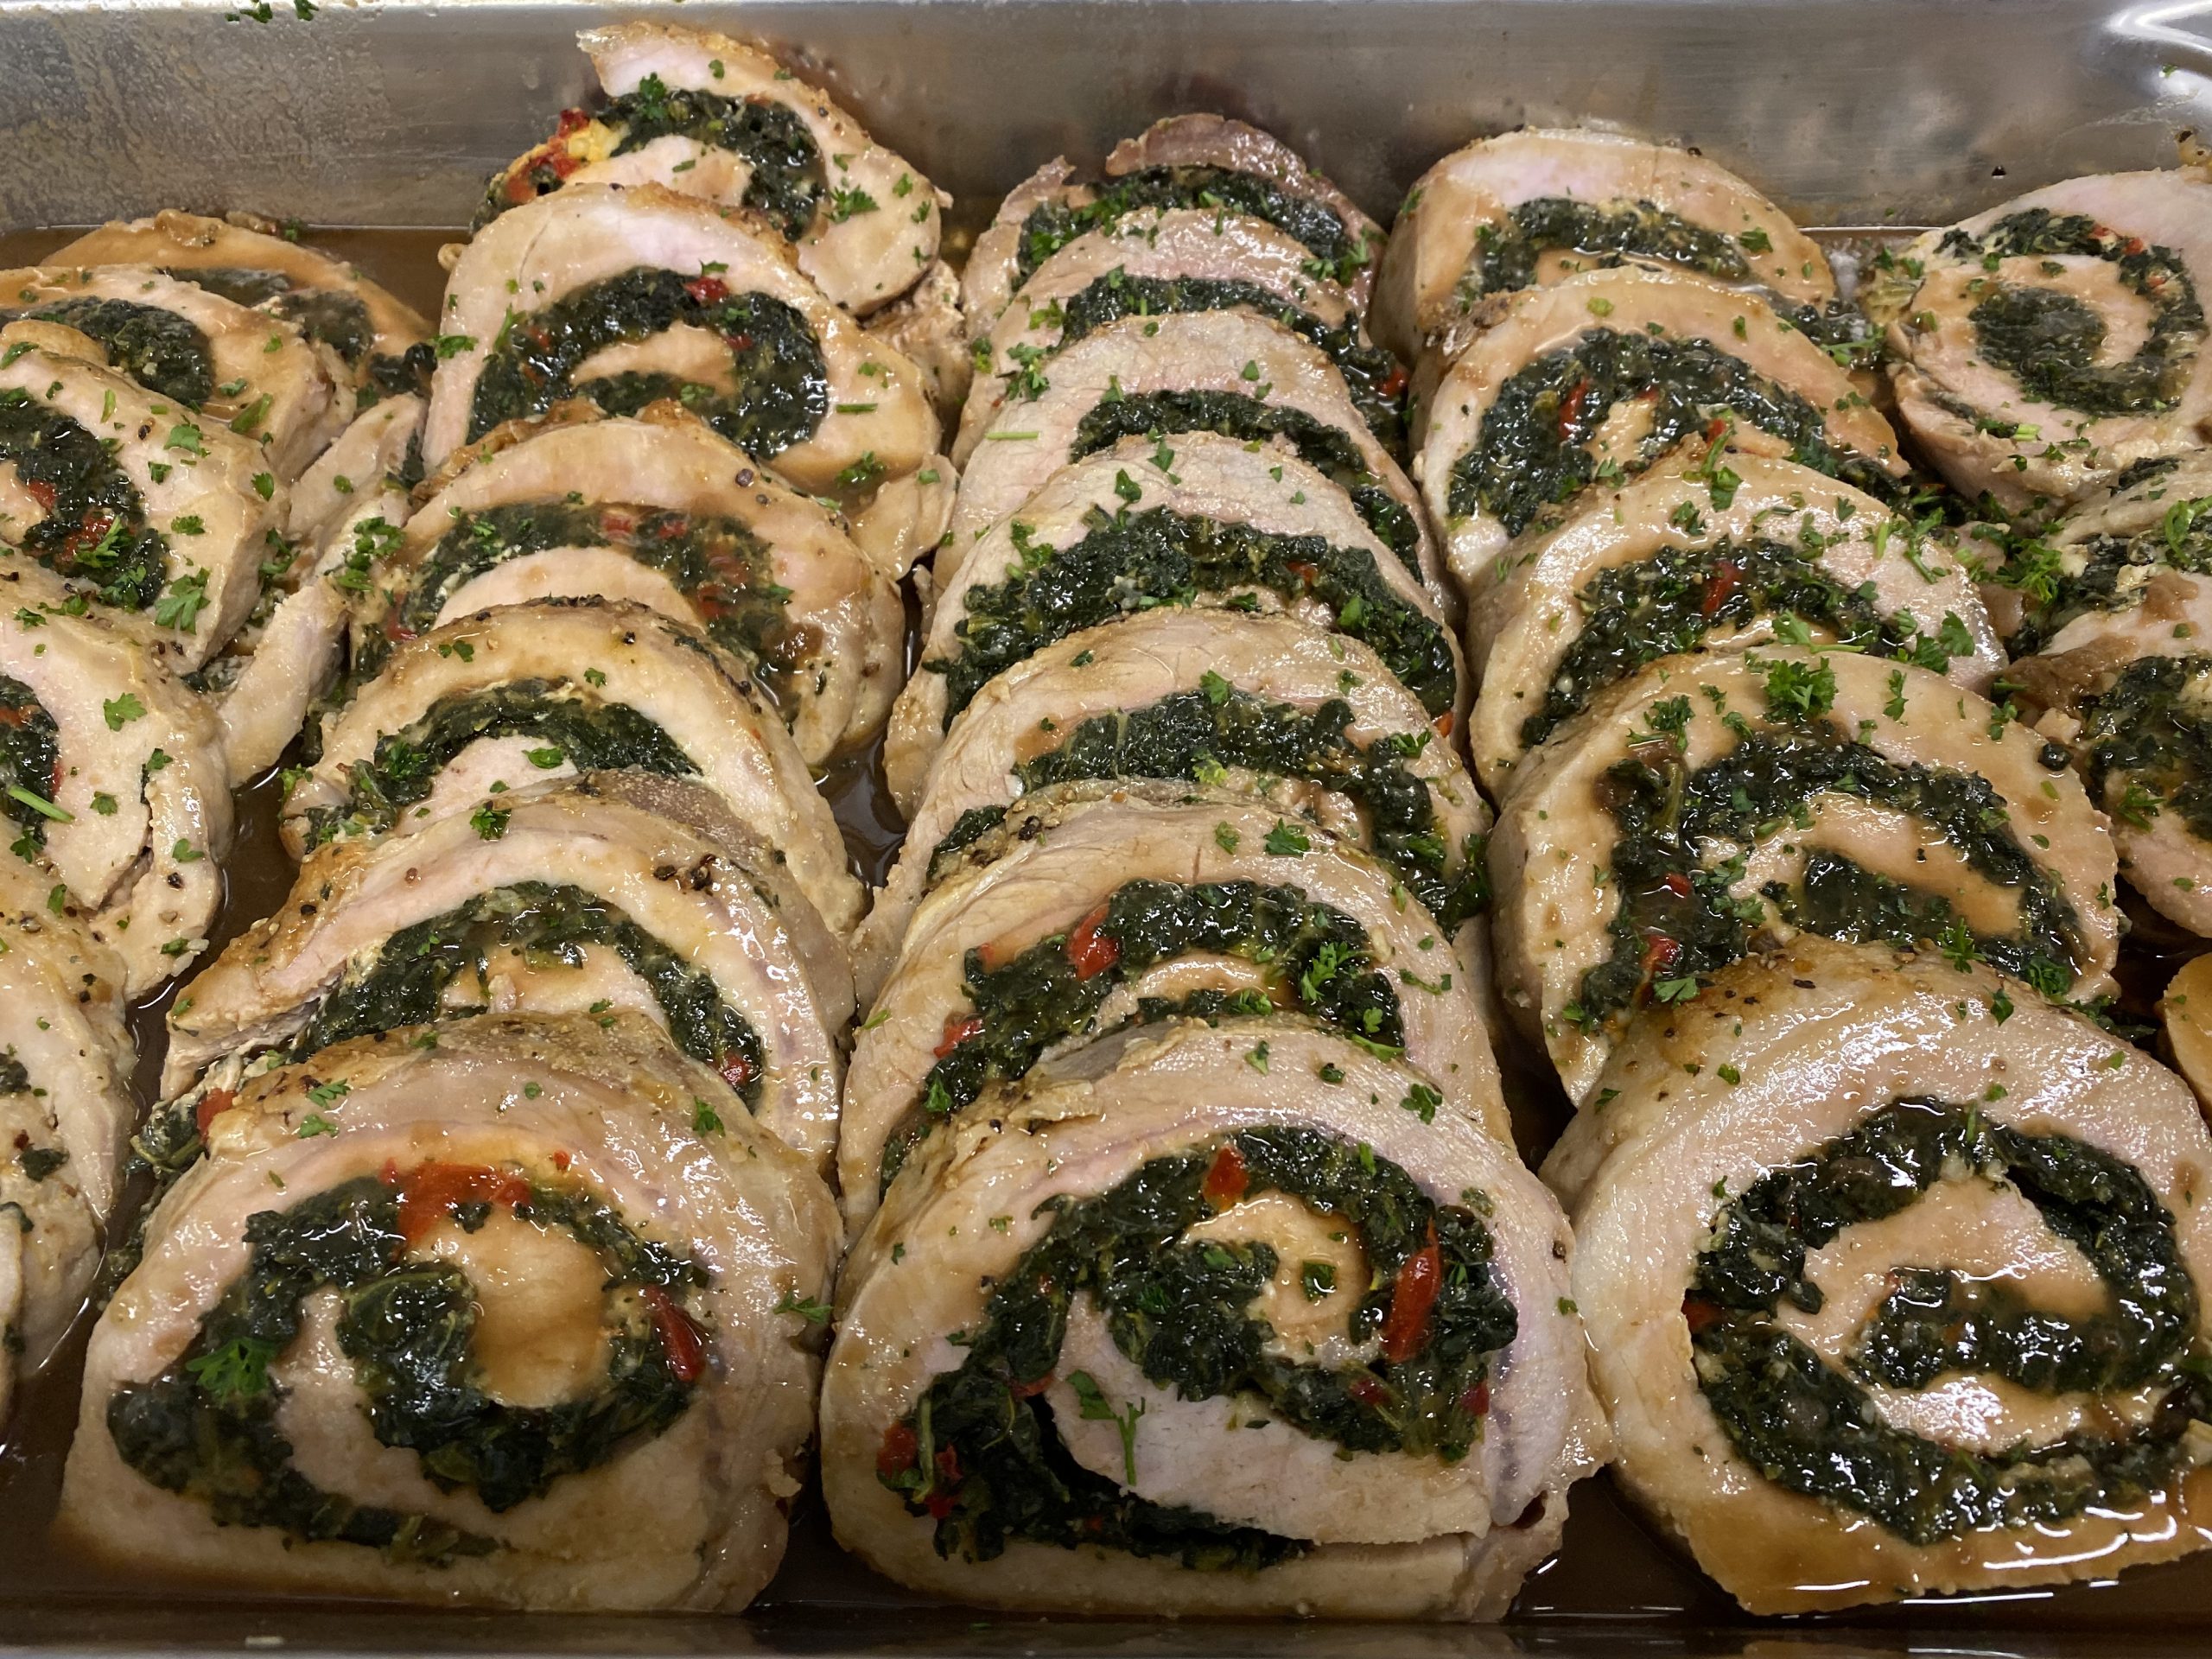 A tray of stuffed pork rolls with spinach and herbs.